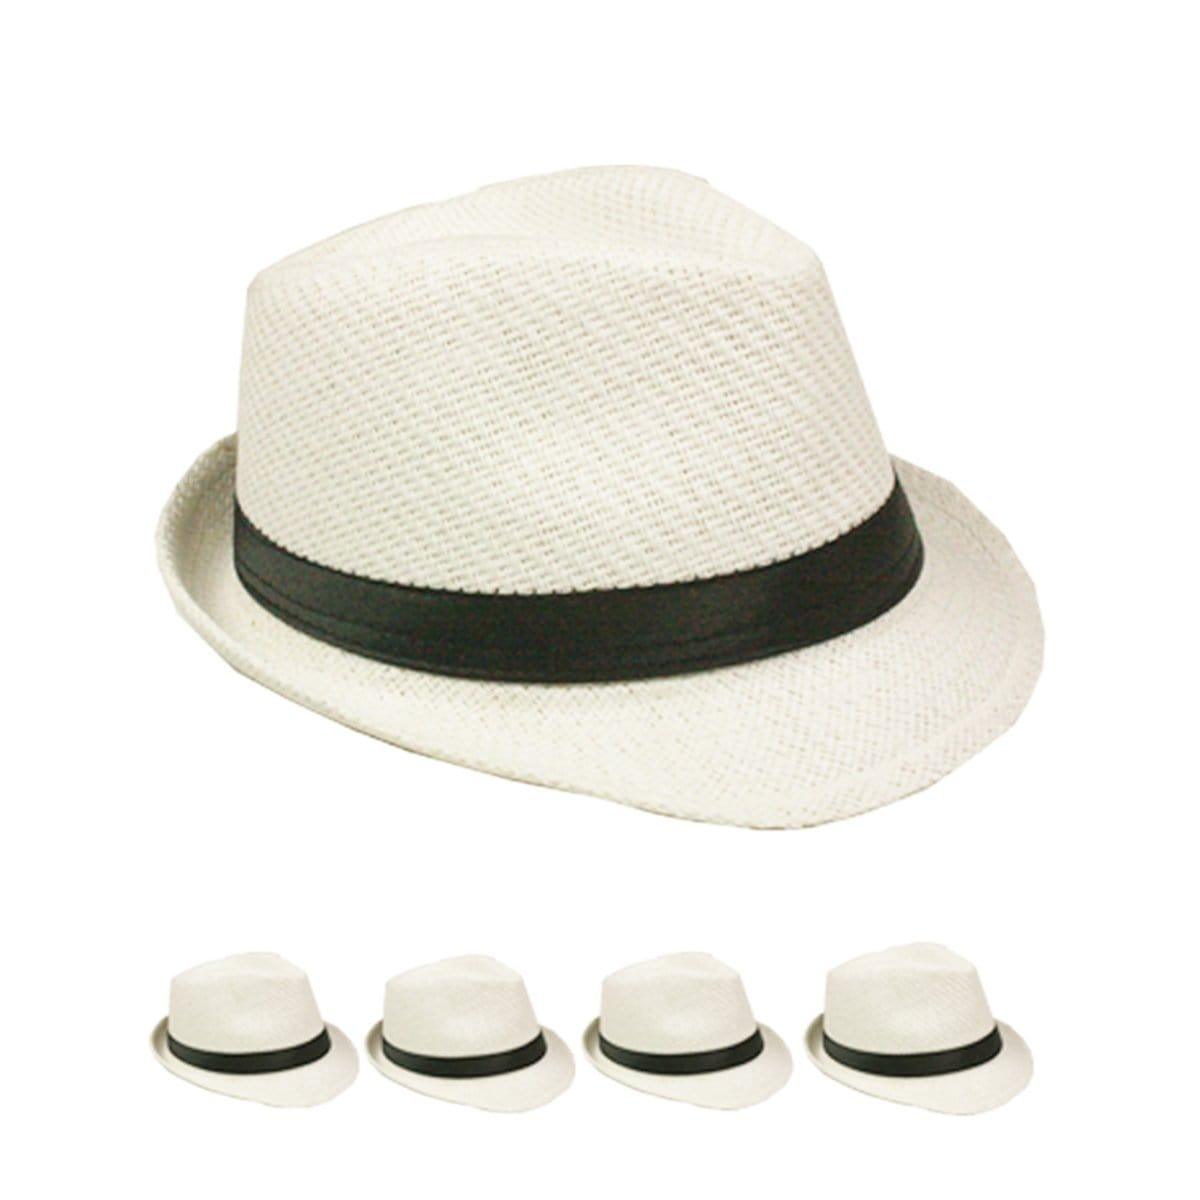 Buy Costume Accessories White fedora hat for adults sold at Party Expert